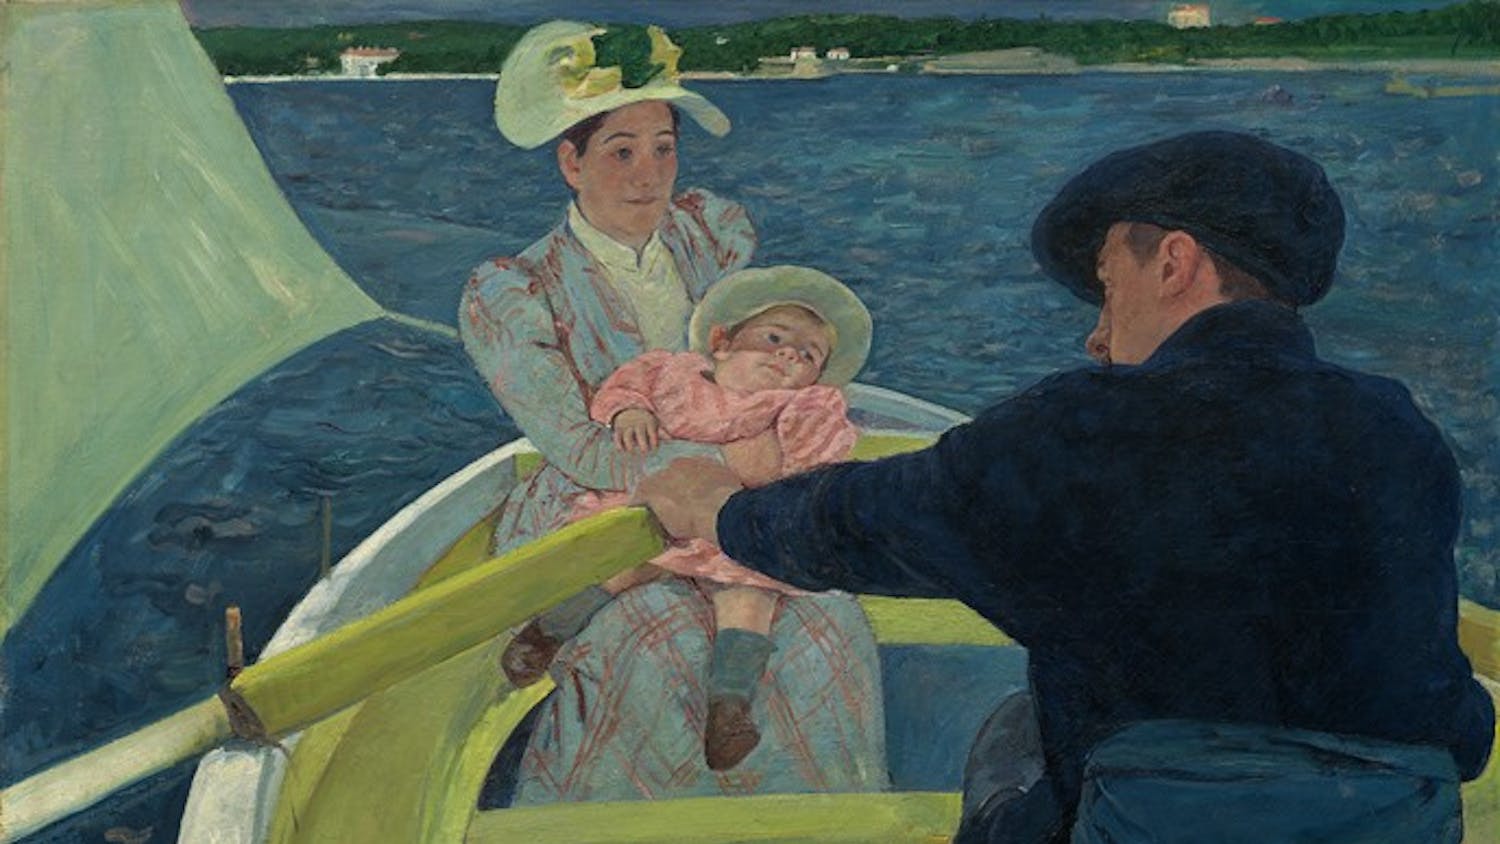 File name: 3063-019.jpg
Mary Cassatt
The Boating Party, 1893/1894
oil on canvas
Overall: 90 x 117.3 cm (35 7/16 x 46 3/16 in.)
framed: 112.1 x 137.8 cm (44 1/8 x 54 1/4 in.)
Chester Dale Collection
